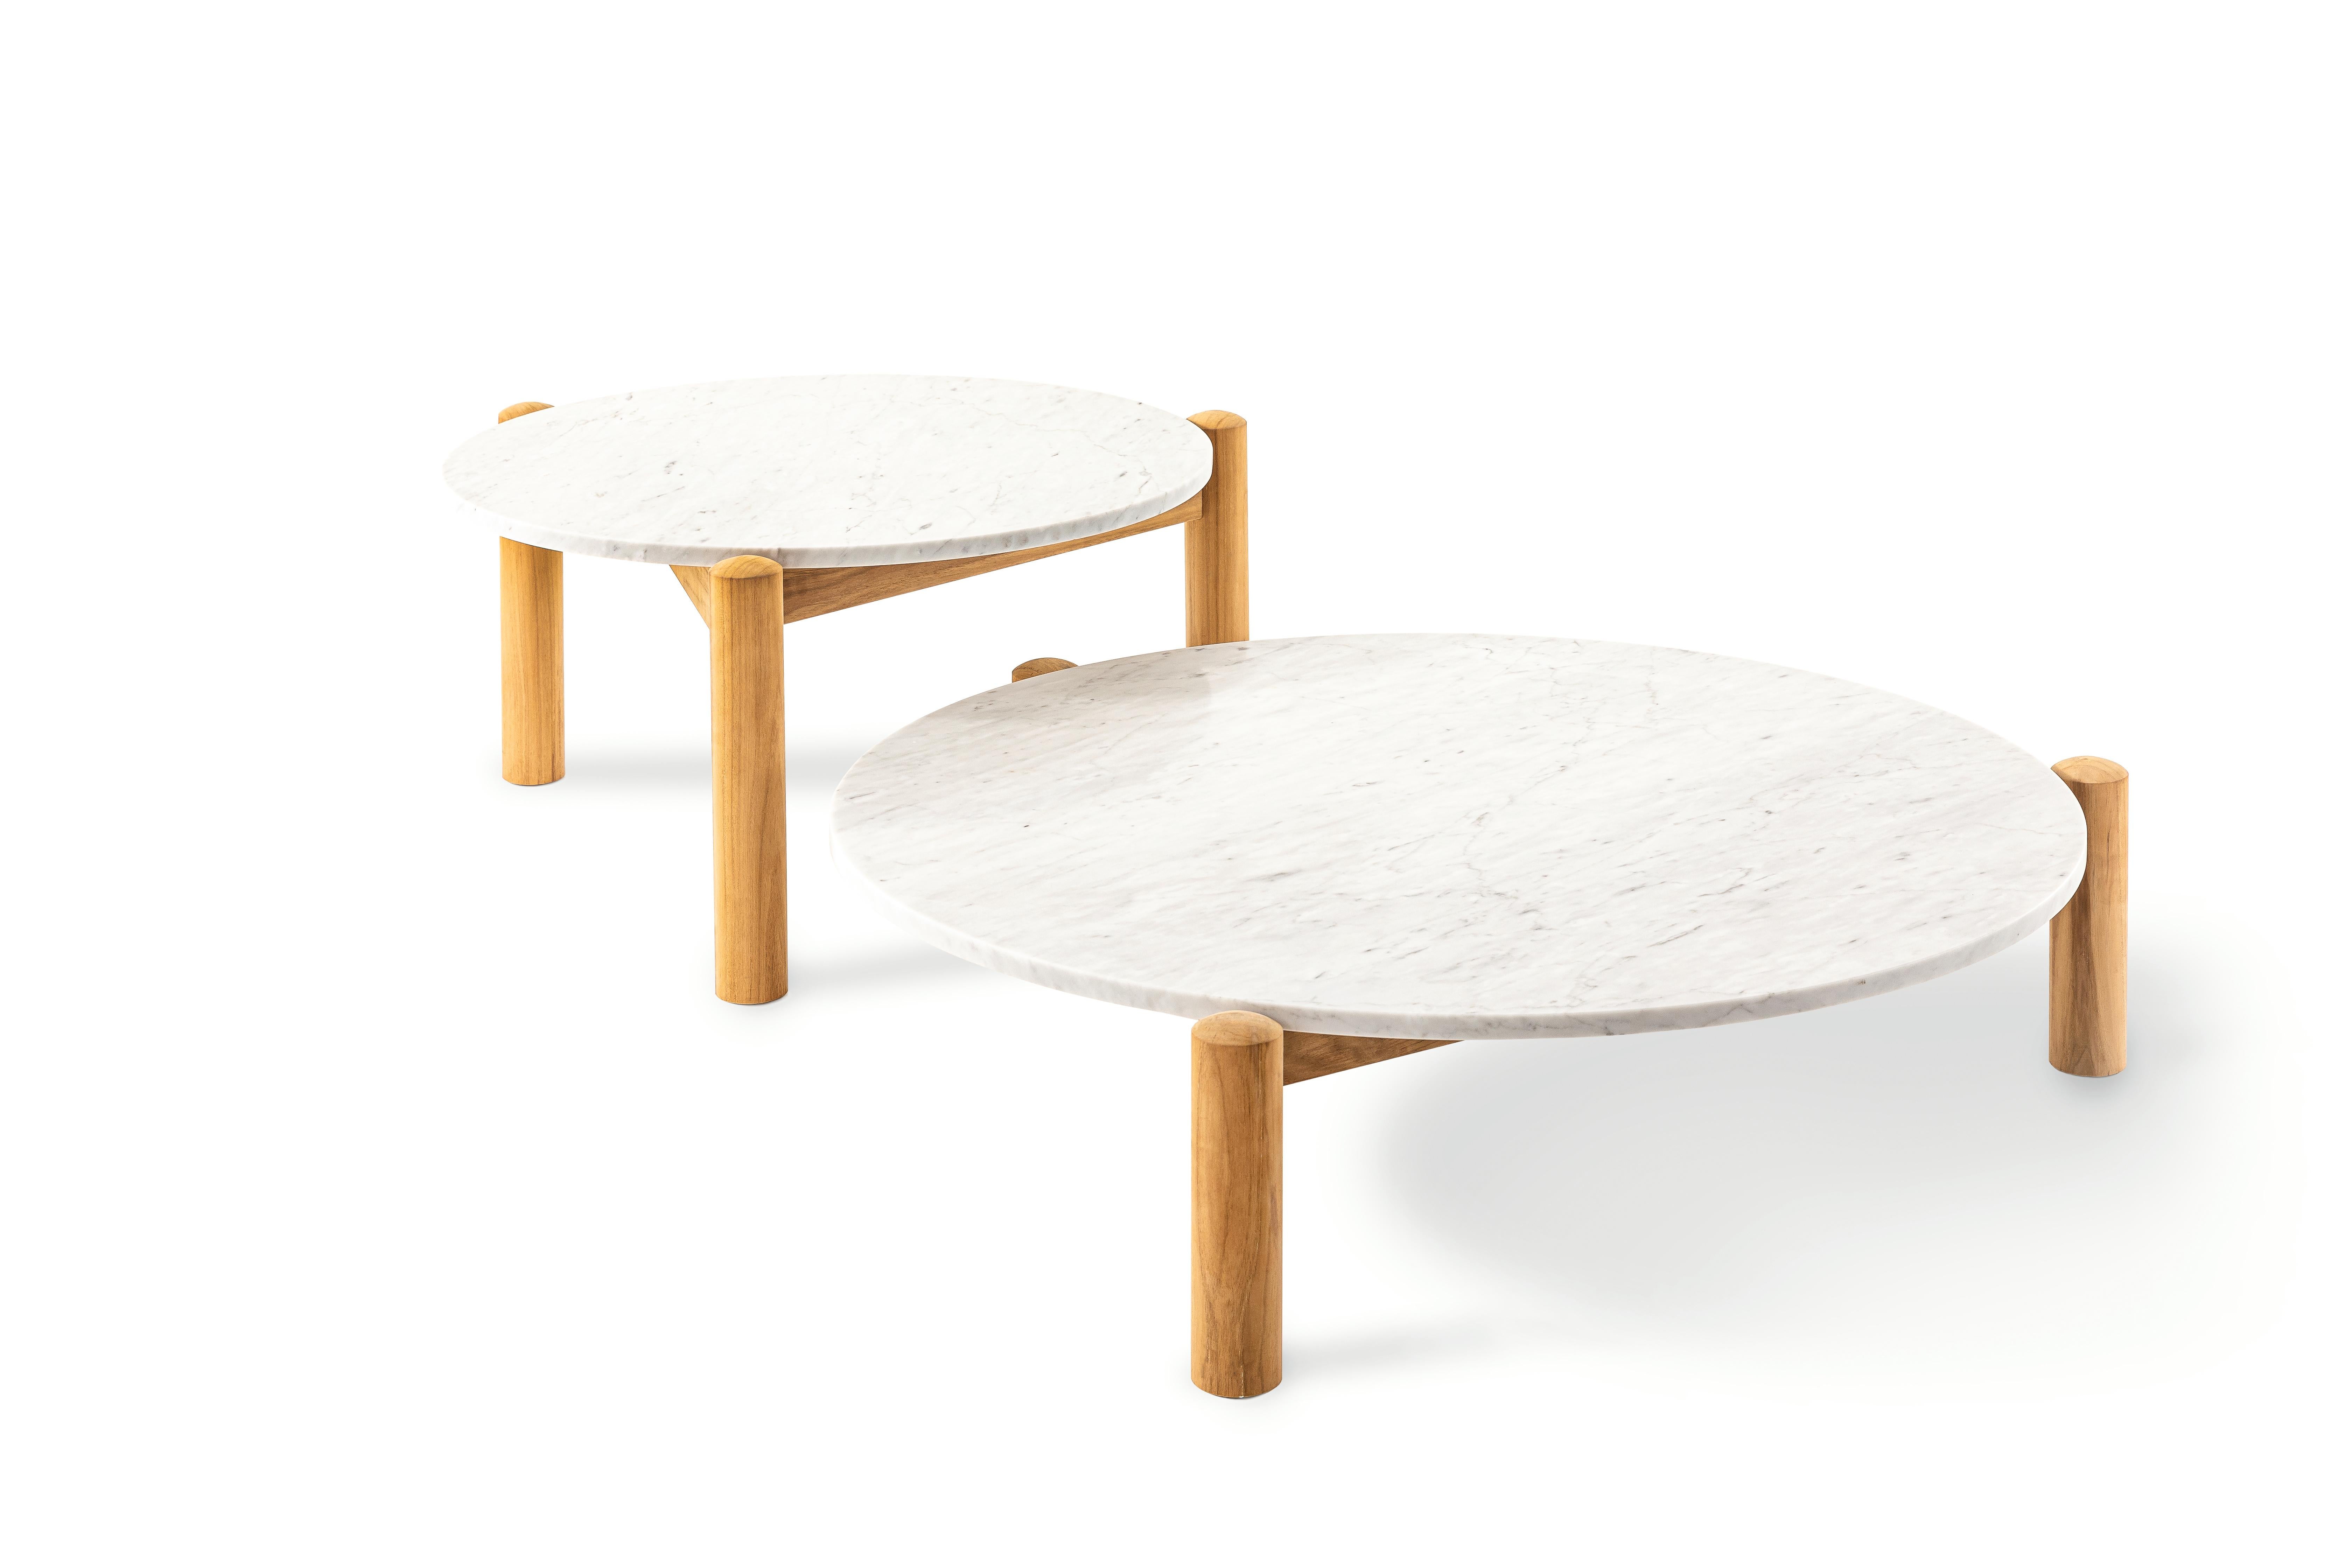 Set of two tables designed by Charlotte Perriand in 1937. Relaunched in 2020.
Manufactured by Cassina in Italy.

The first model of this historic design table was crafted in 1937 for Charlotte Perriand’s studio in Montparnasse. The Table à